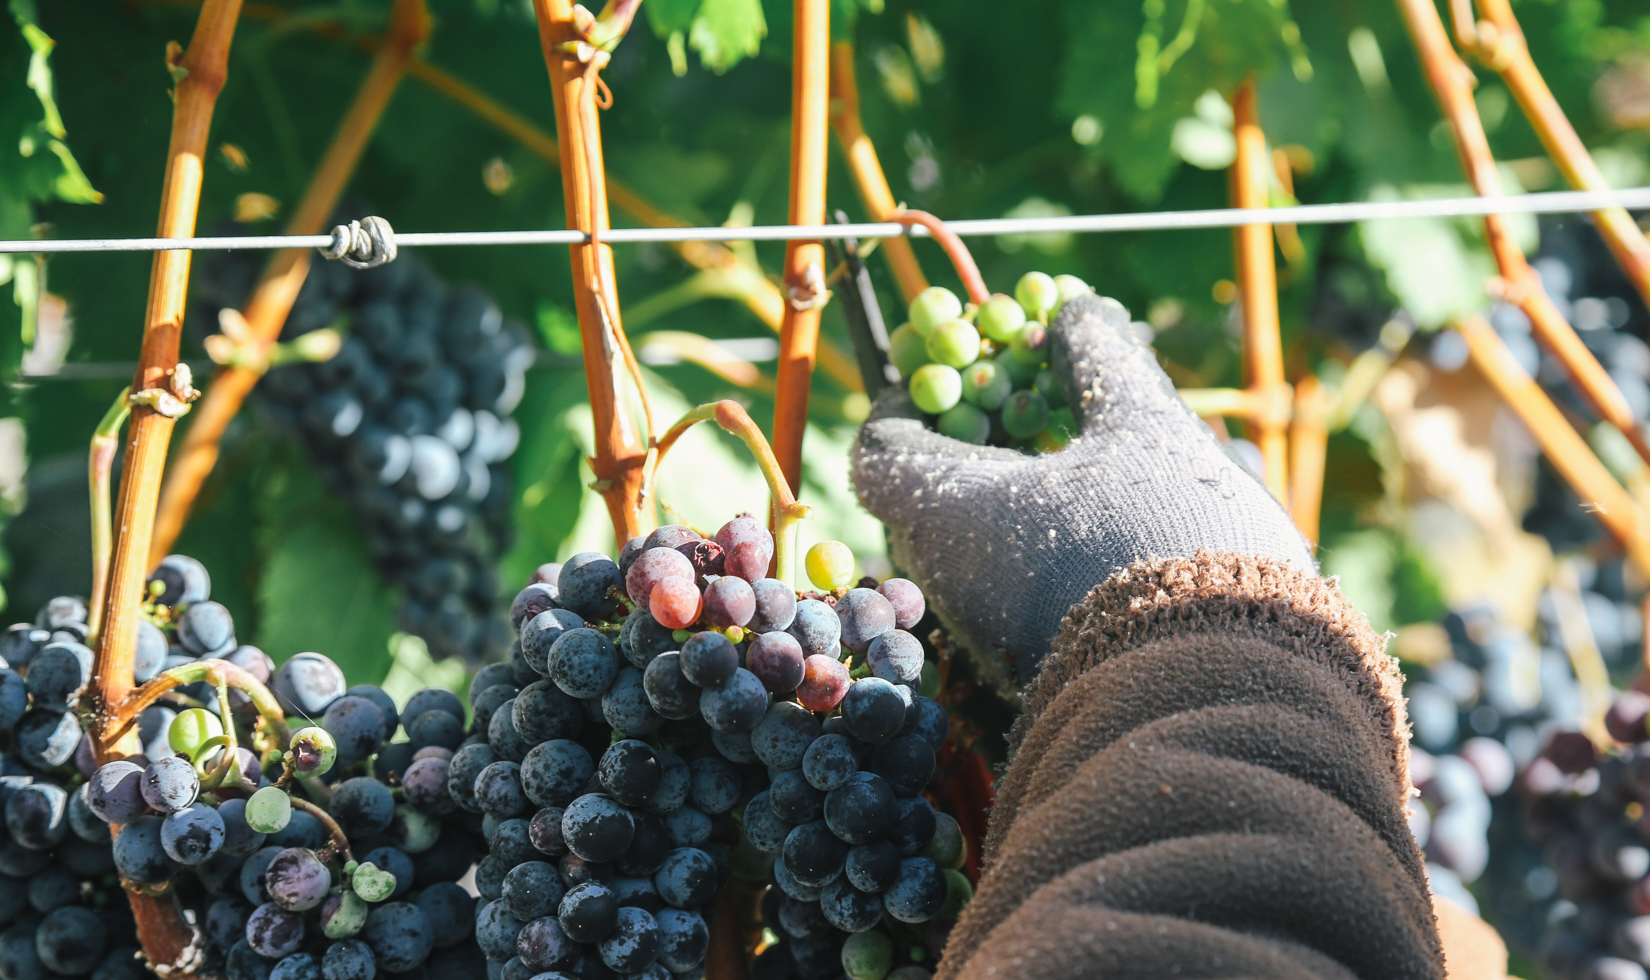 Purple grape bundles hanging on the vine. A gloved hand comes up from the bottom right grasping a green cluster.